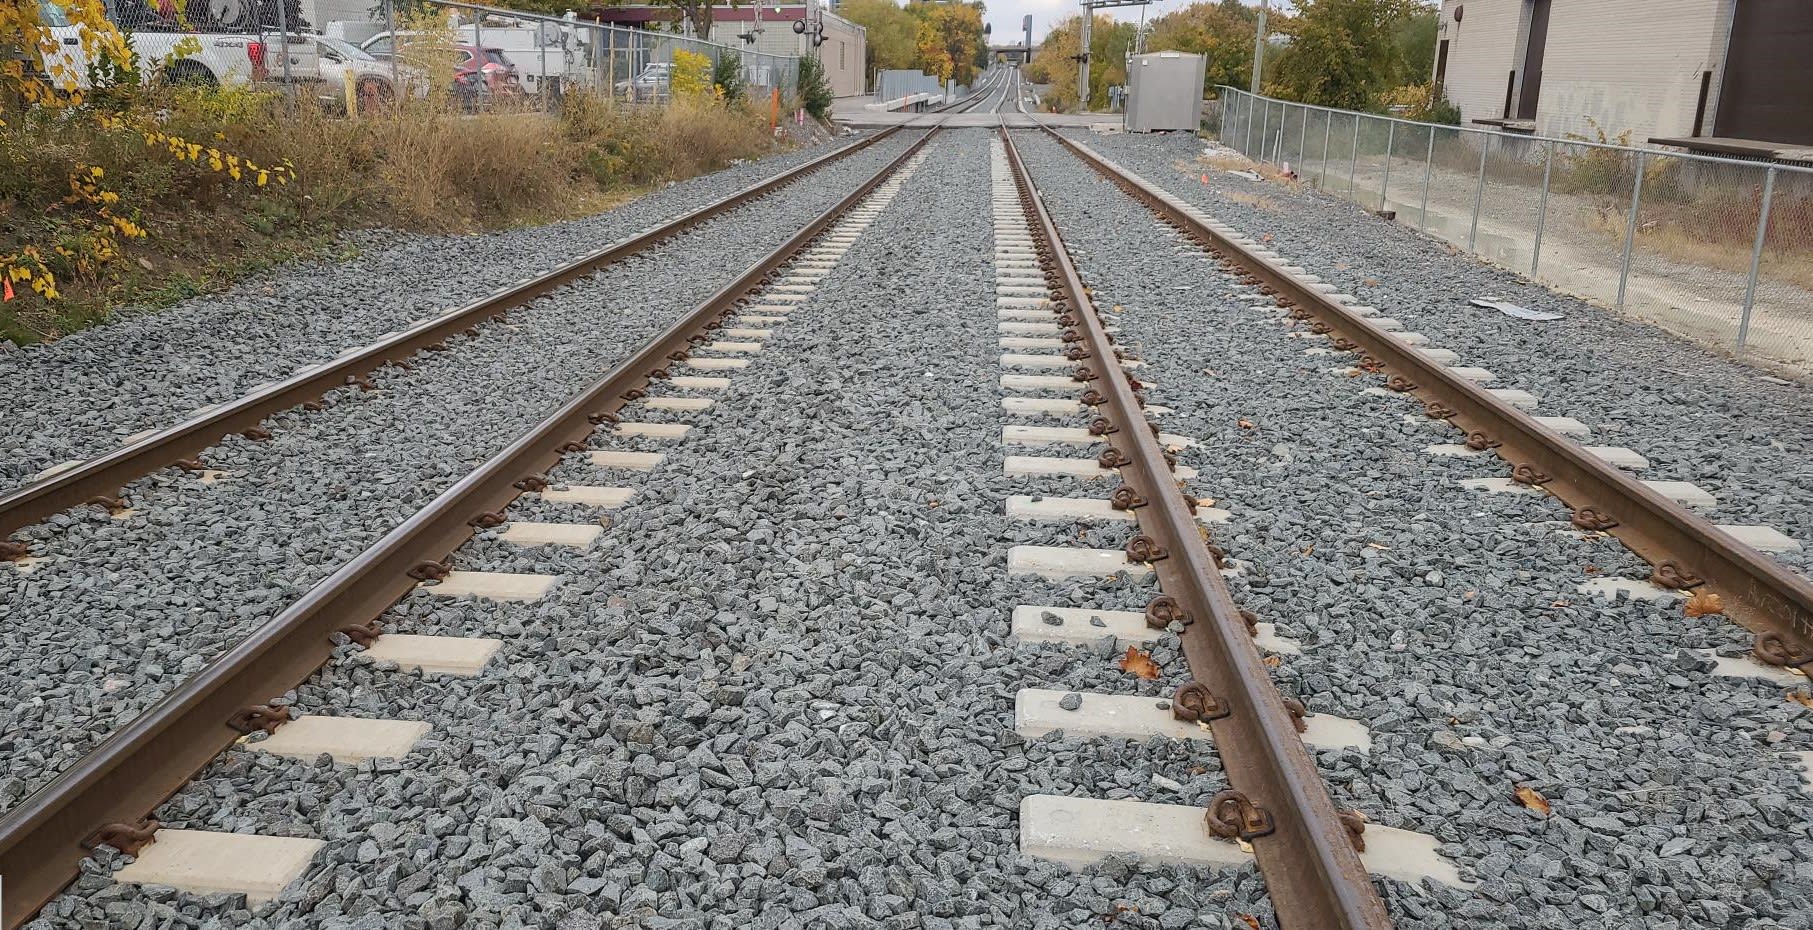 Double tracks on the Stouffville line